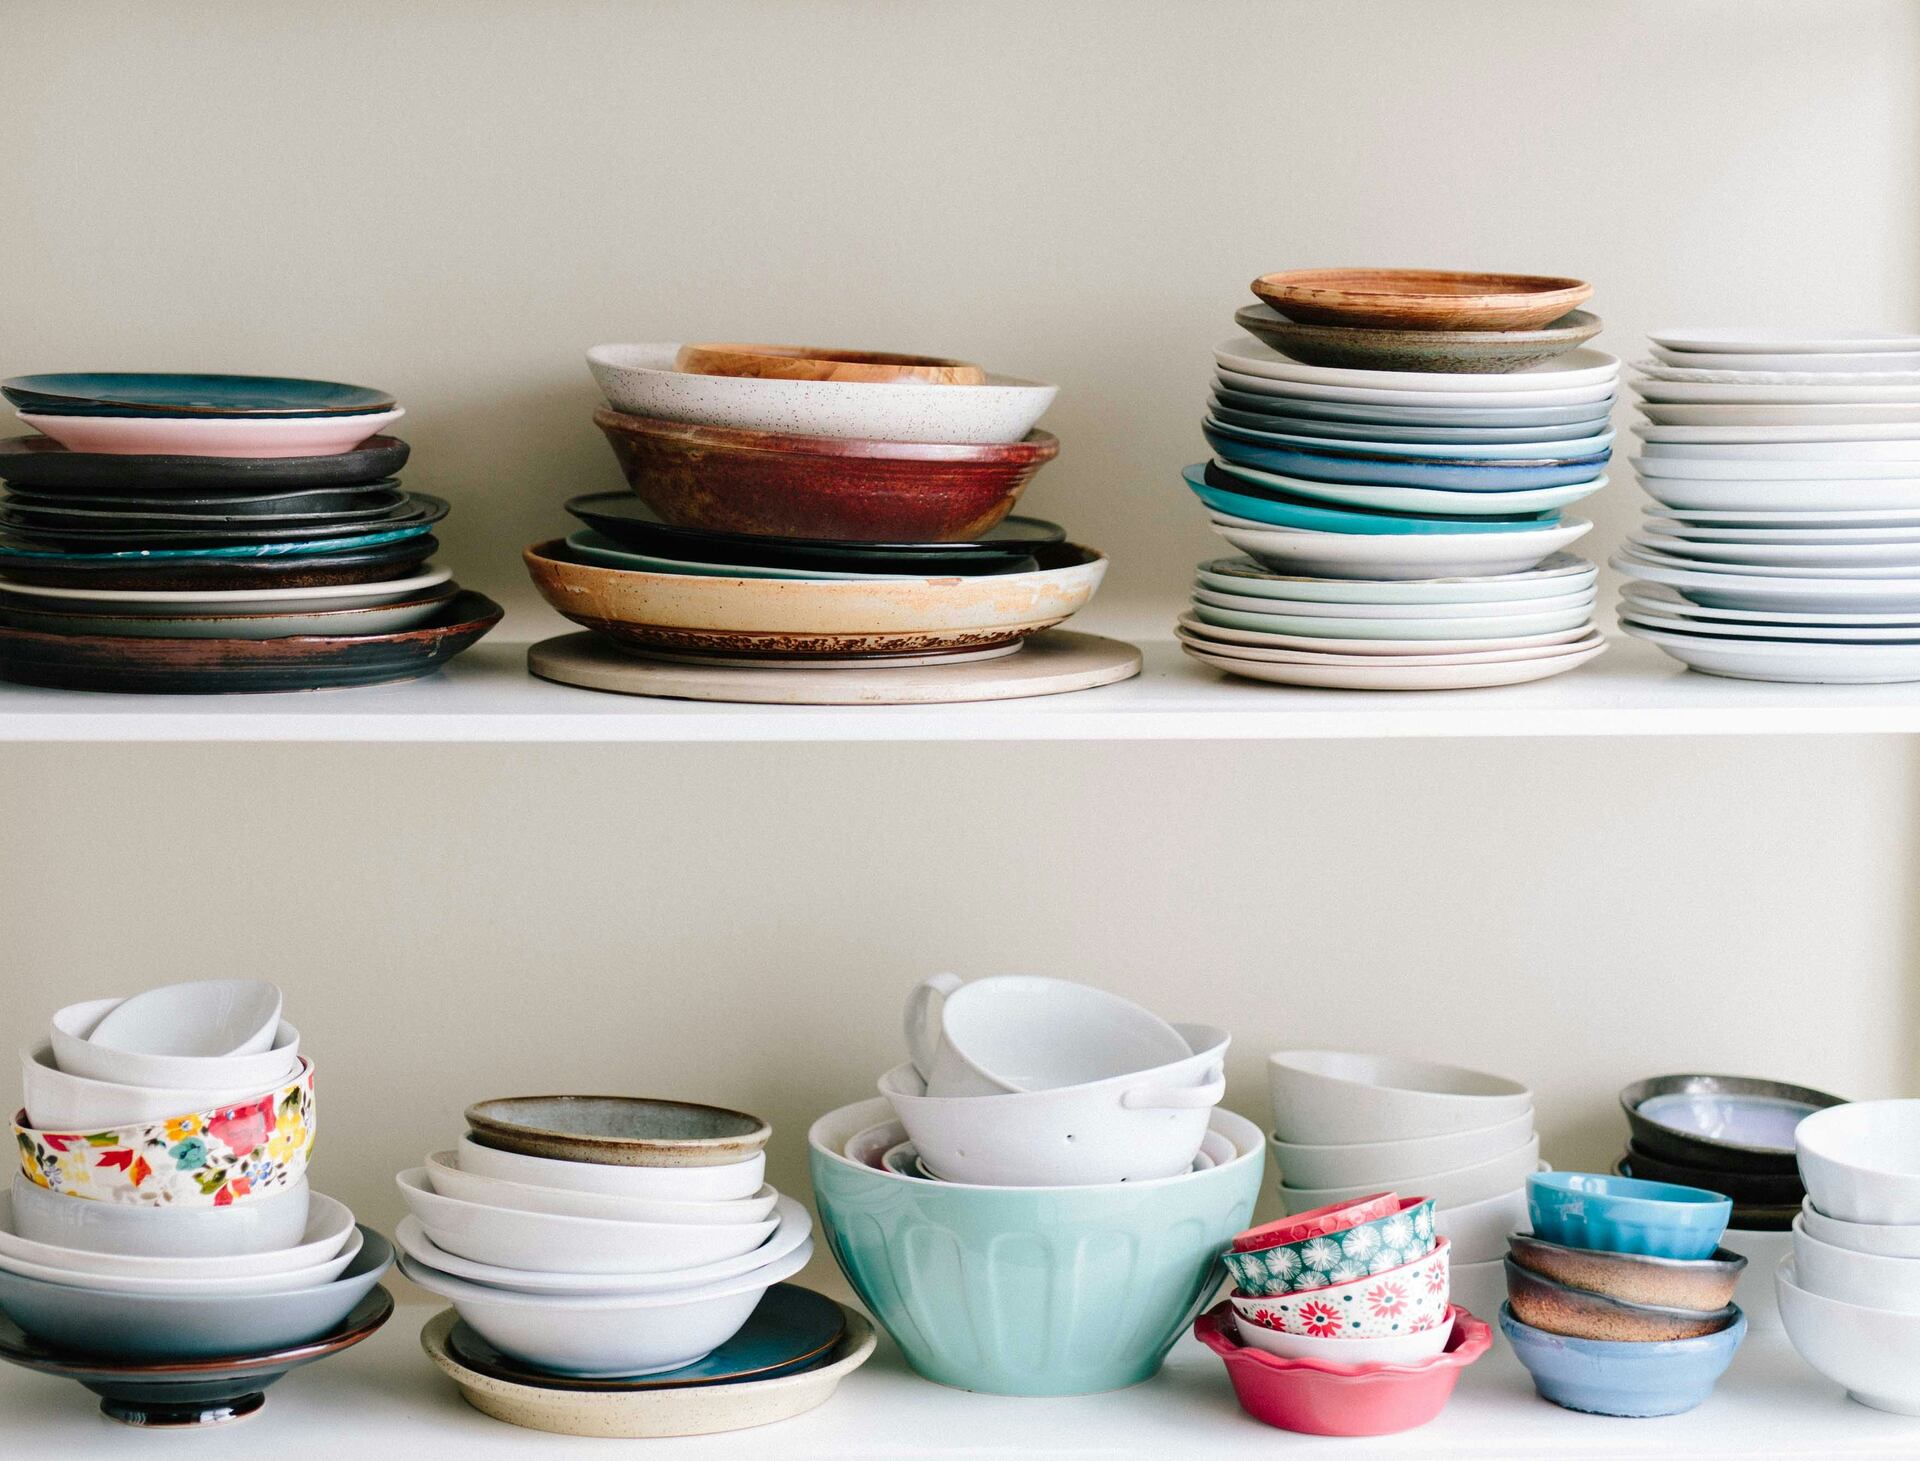 Stacked plates and bowls